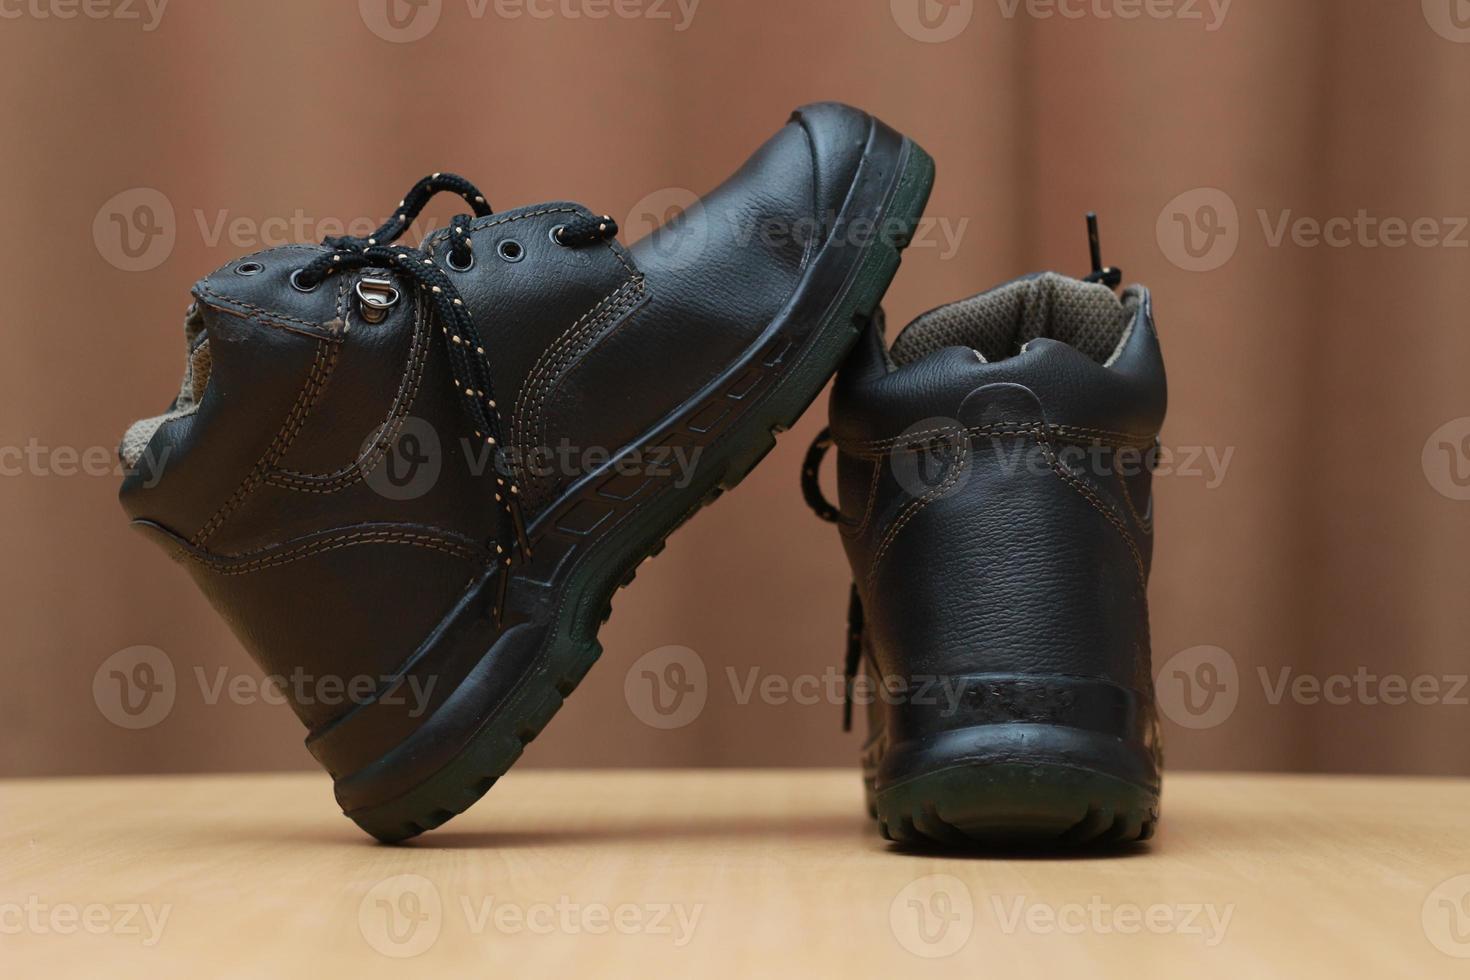 Detailed photo of a pair of safety shoes for work. Work protective equipment concept photo.